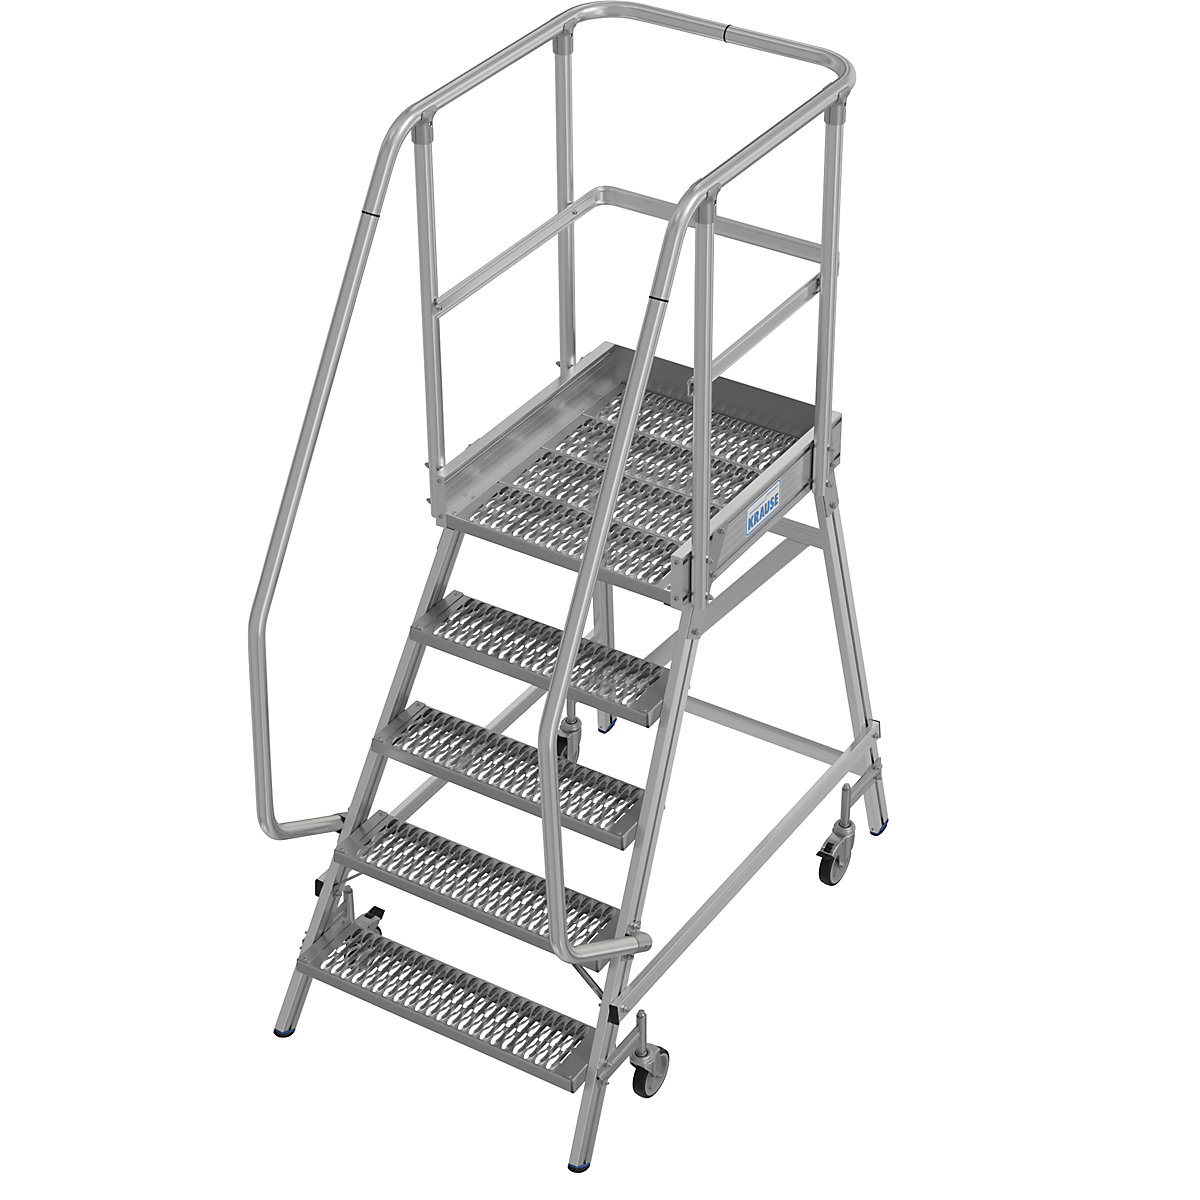 Mobile safety steps with R13 anti-slip properties – KRAUSE, with single sided access, 5 steps incl. platform-5